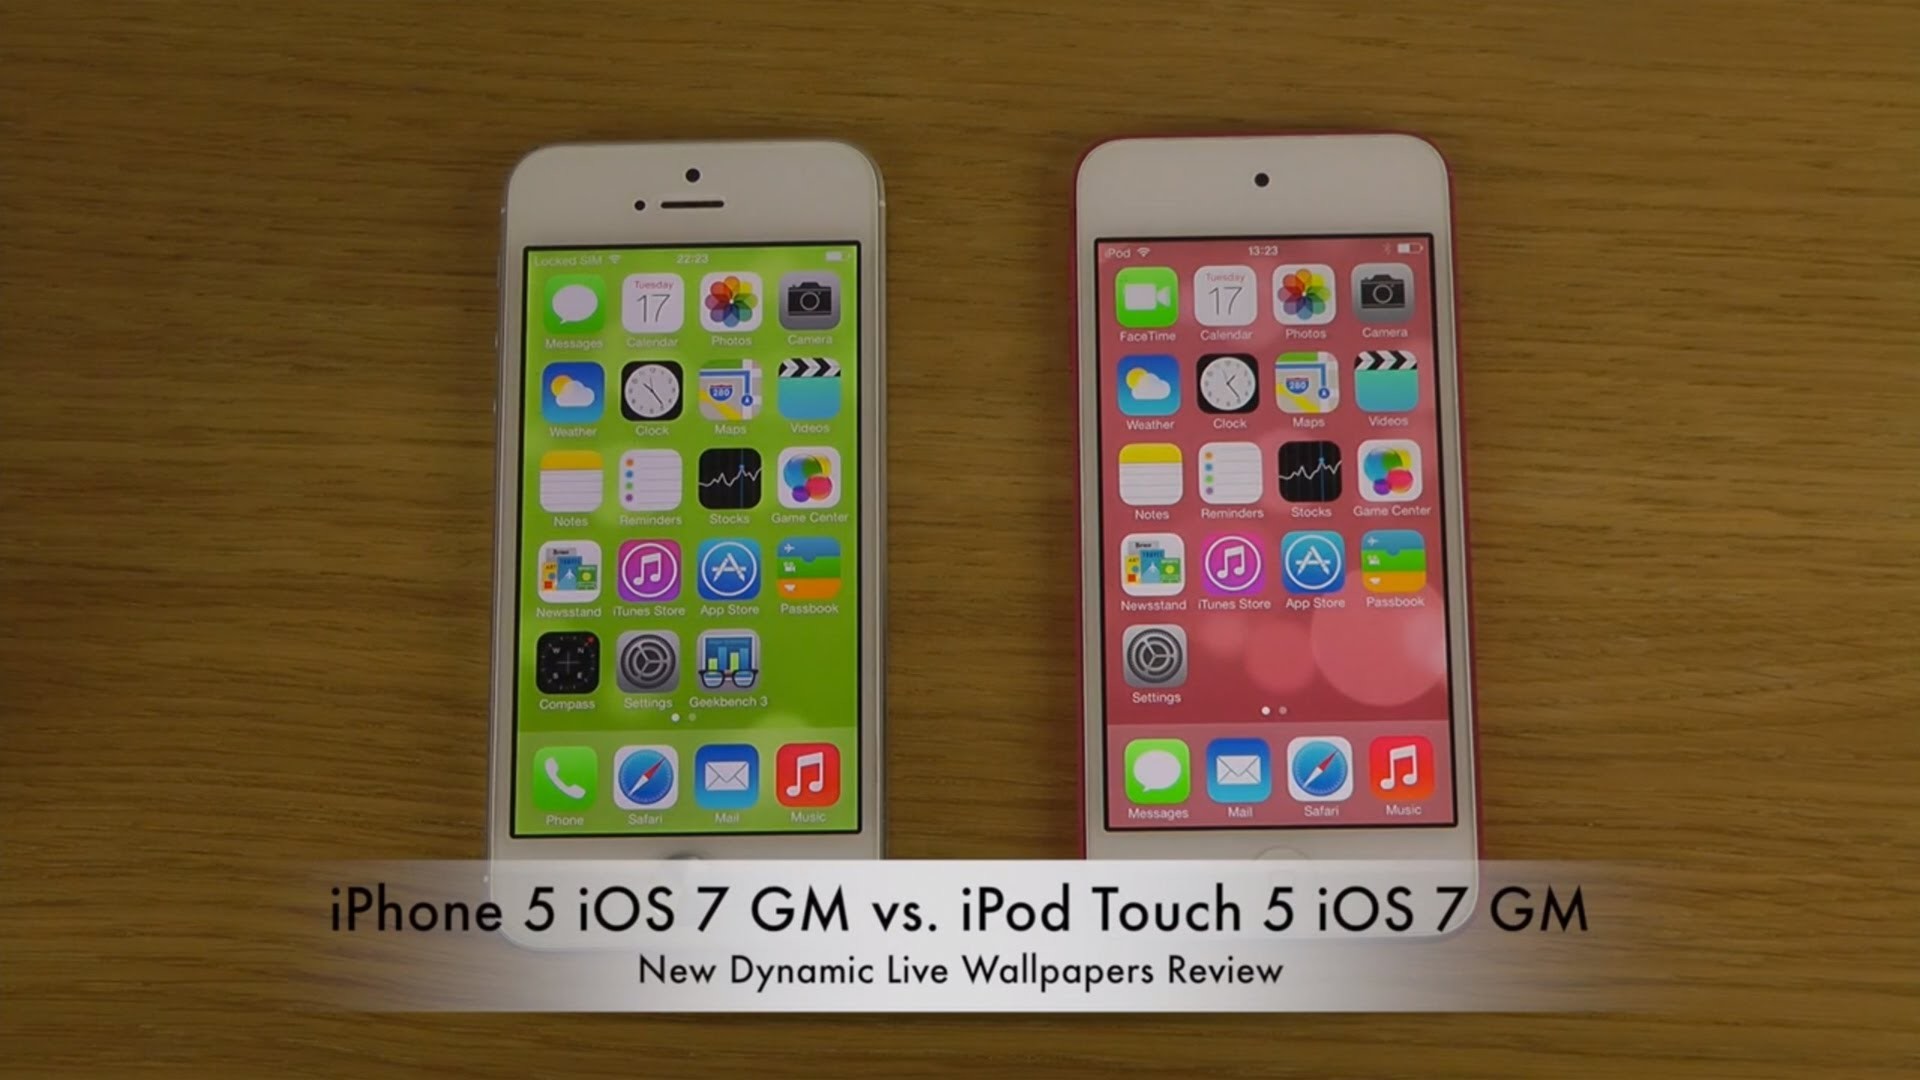 1920x1080 iPod Touch 5 iOS 7 GM - New Dynamic Live Wallpapers Comparison Review -  YouTube